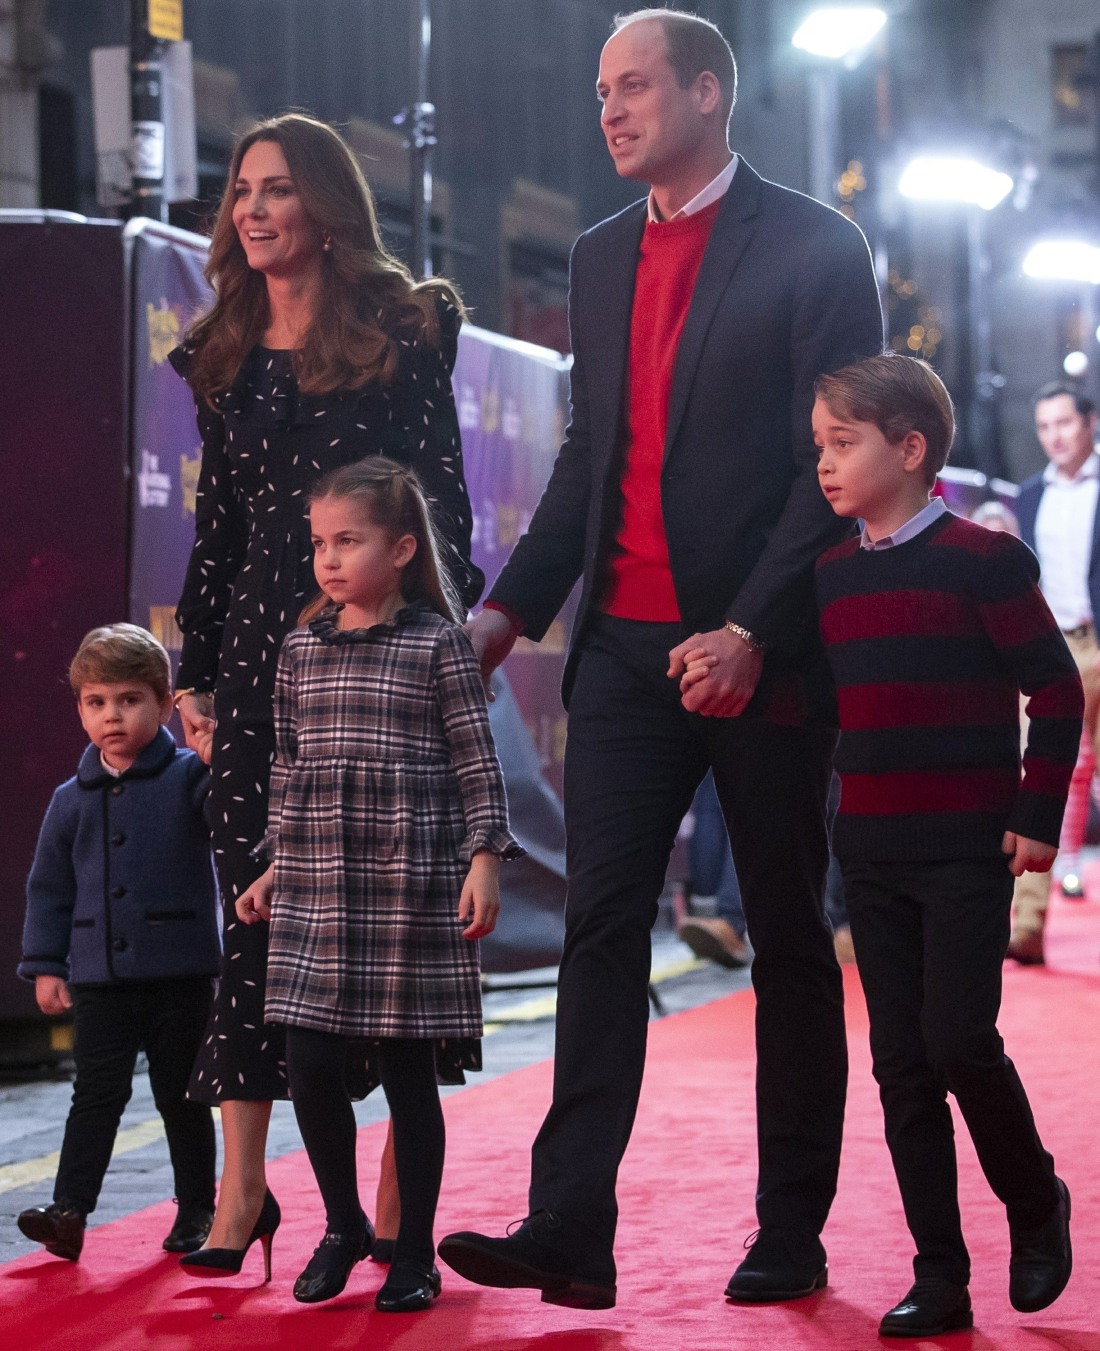 The Cambridge Family attend a special Christmas Pantomime performance at London's Palladium Theatre